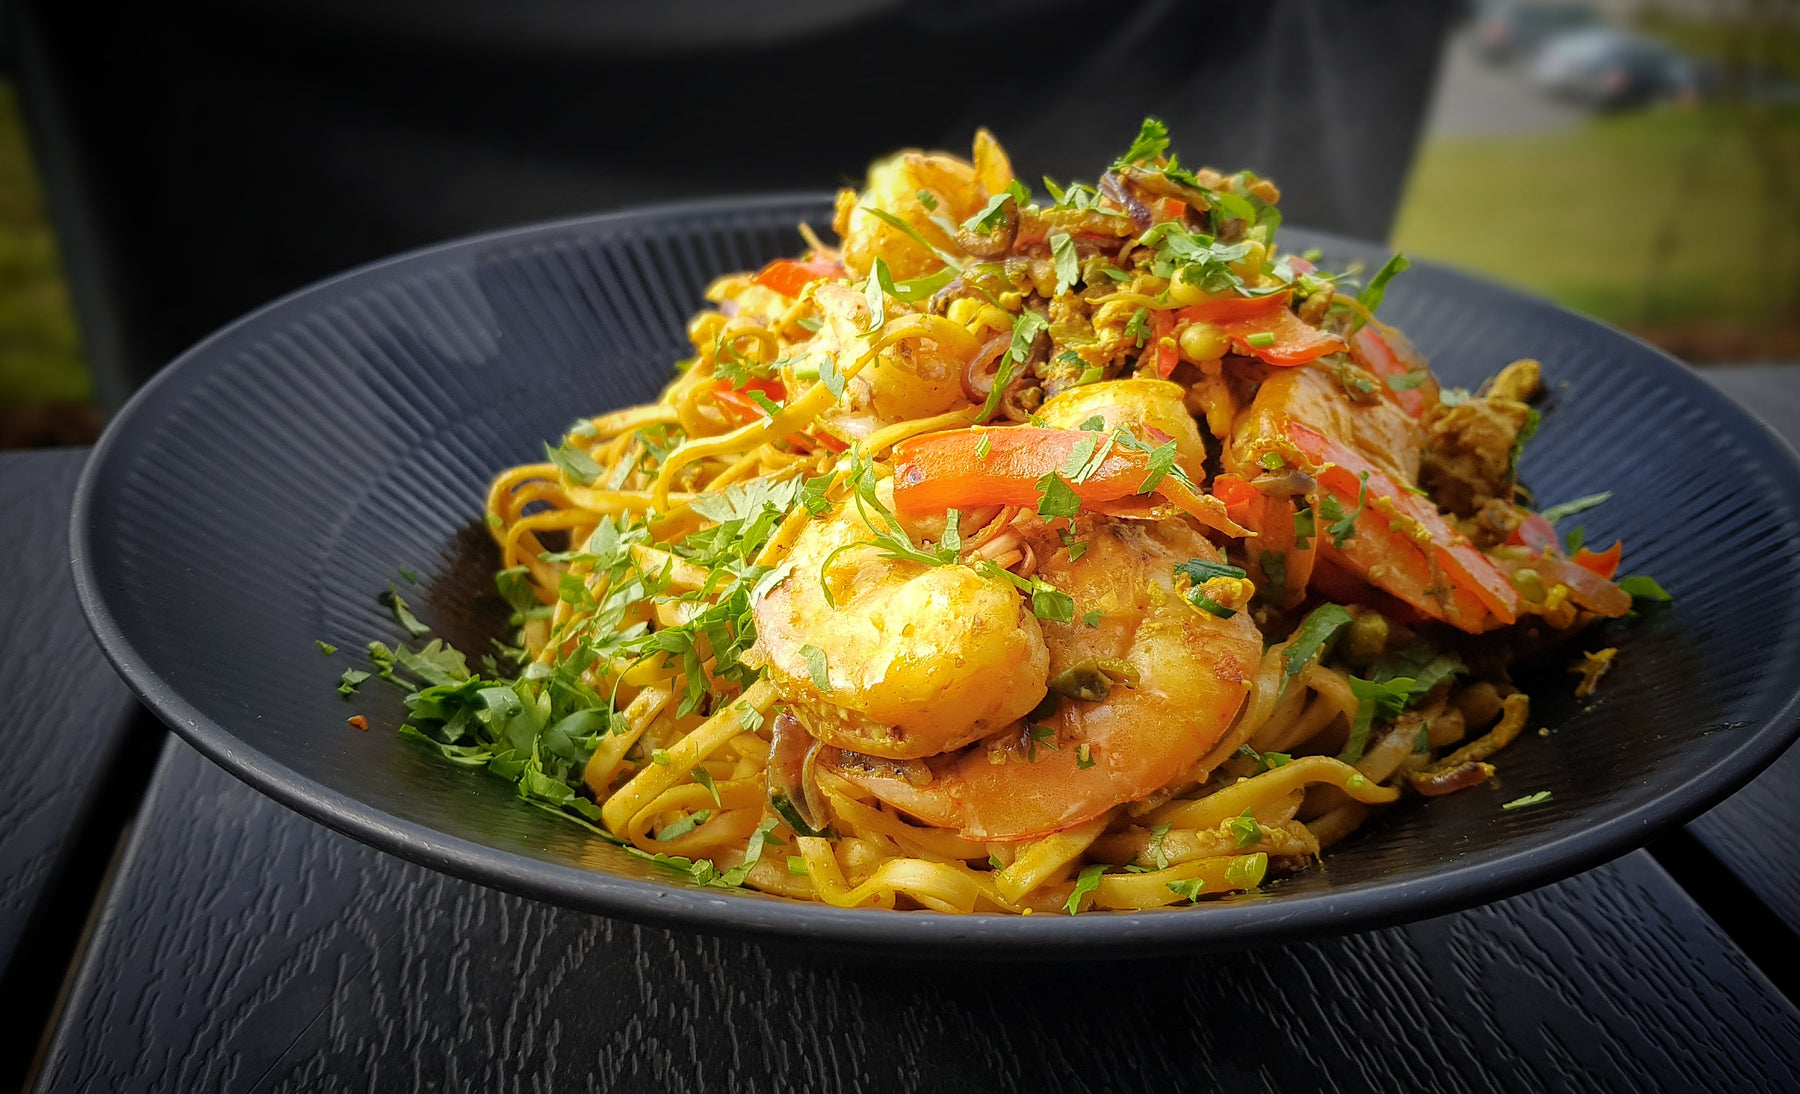 Noodles with tiger prawns made by HOT WOK